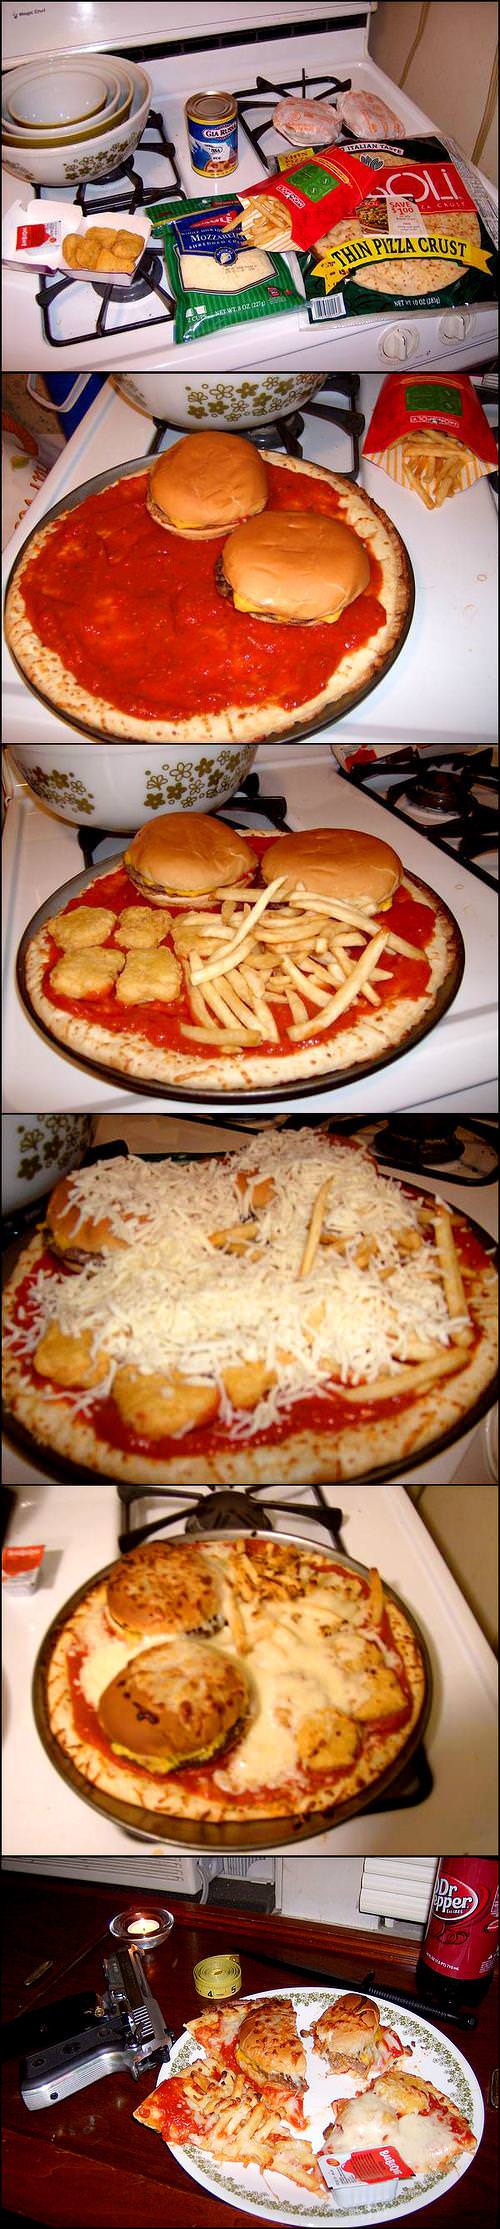 cursed images - 4chan ck pizza - Low A Pilla Crust Thind Mo Der